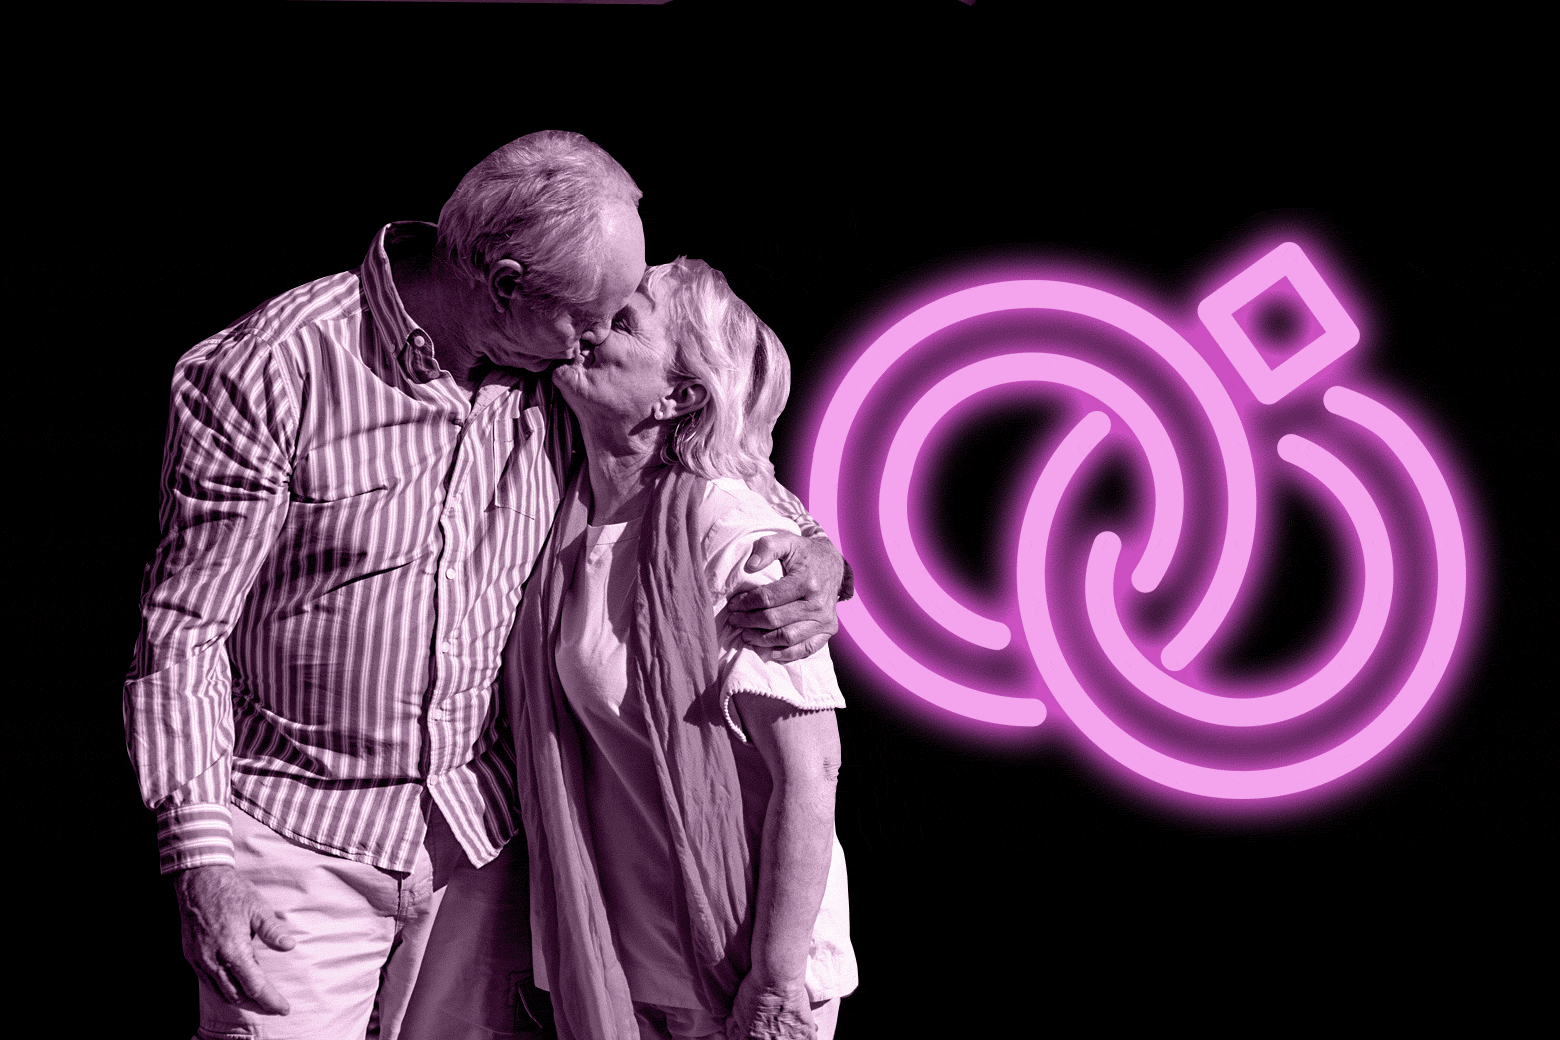 I Cheated On My Wife But Now I Want Our Sex Life Back